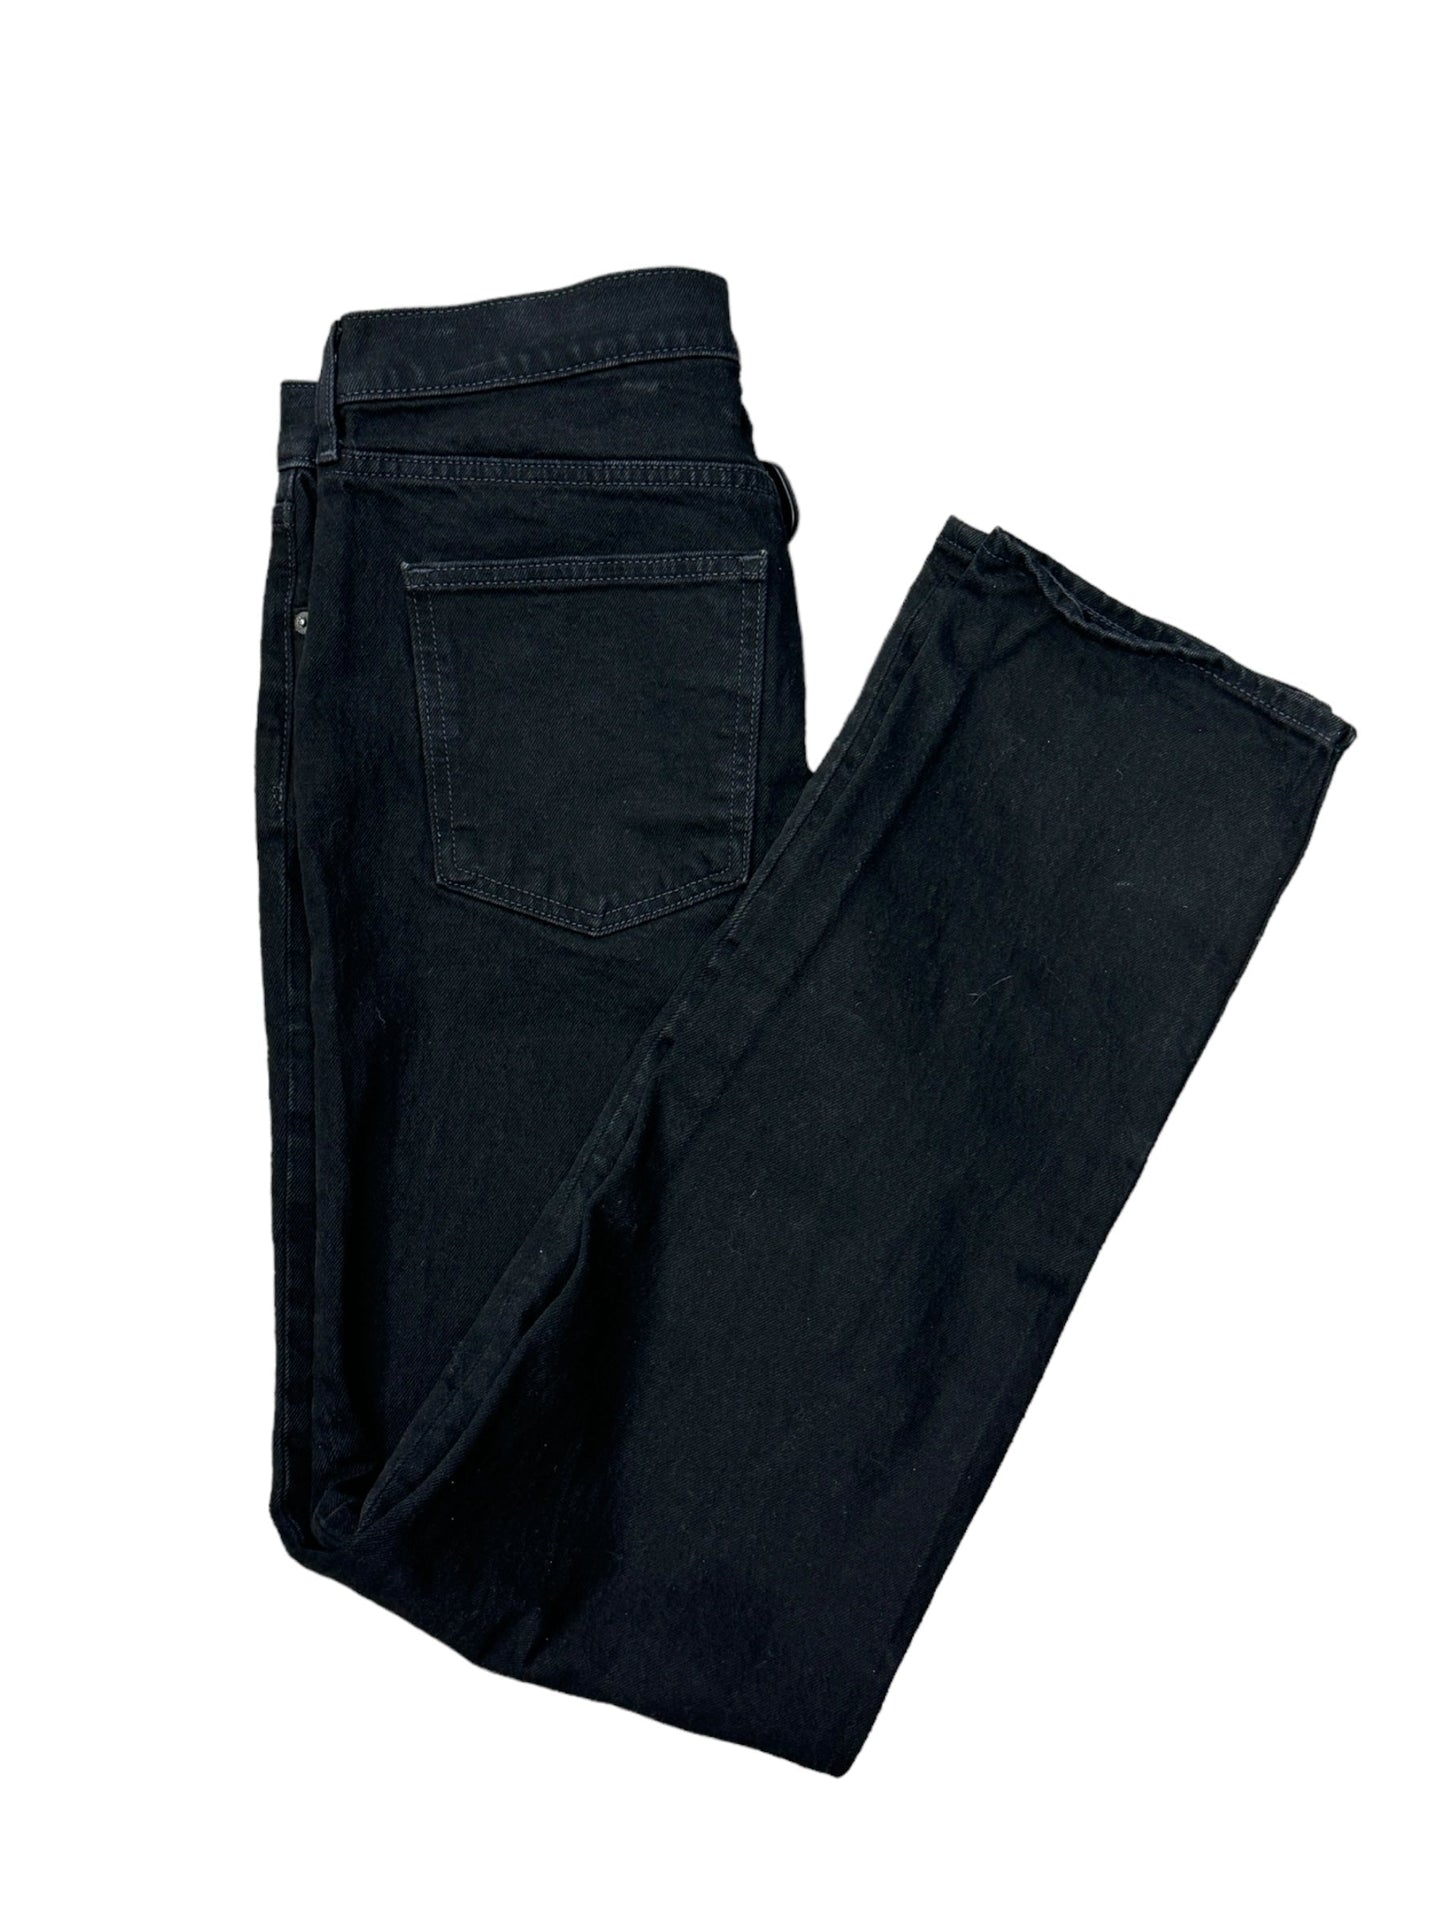 Pants Other By Gap  Size: 14tall